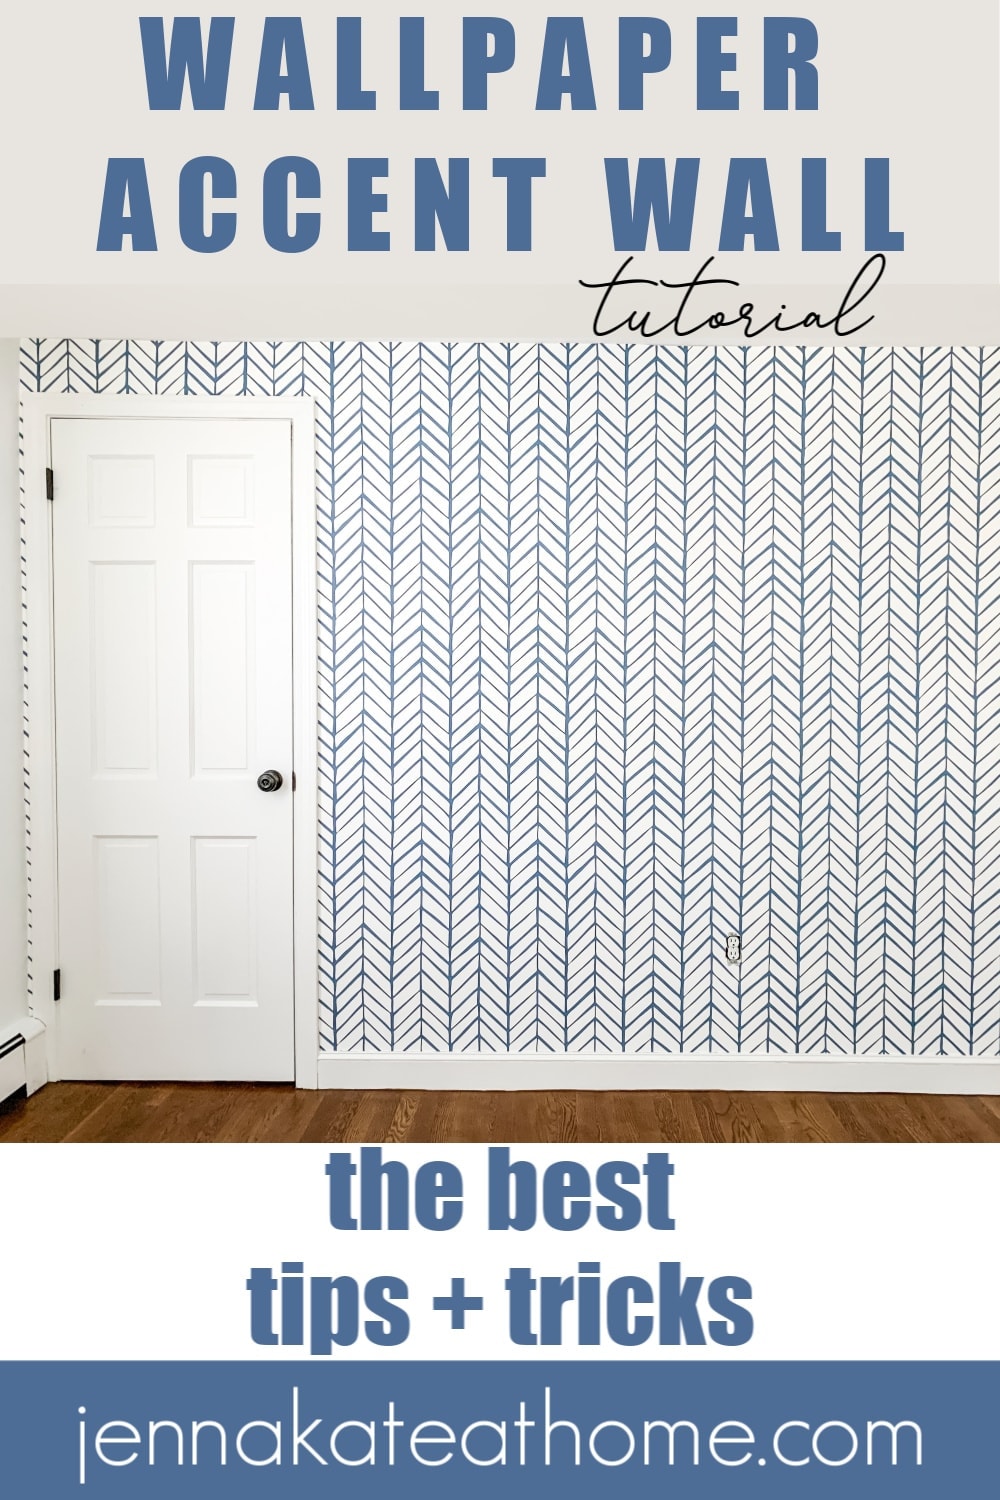 How to install traditional wallpaper - the best tips and tricks (spoiler: it's not that difficult!)